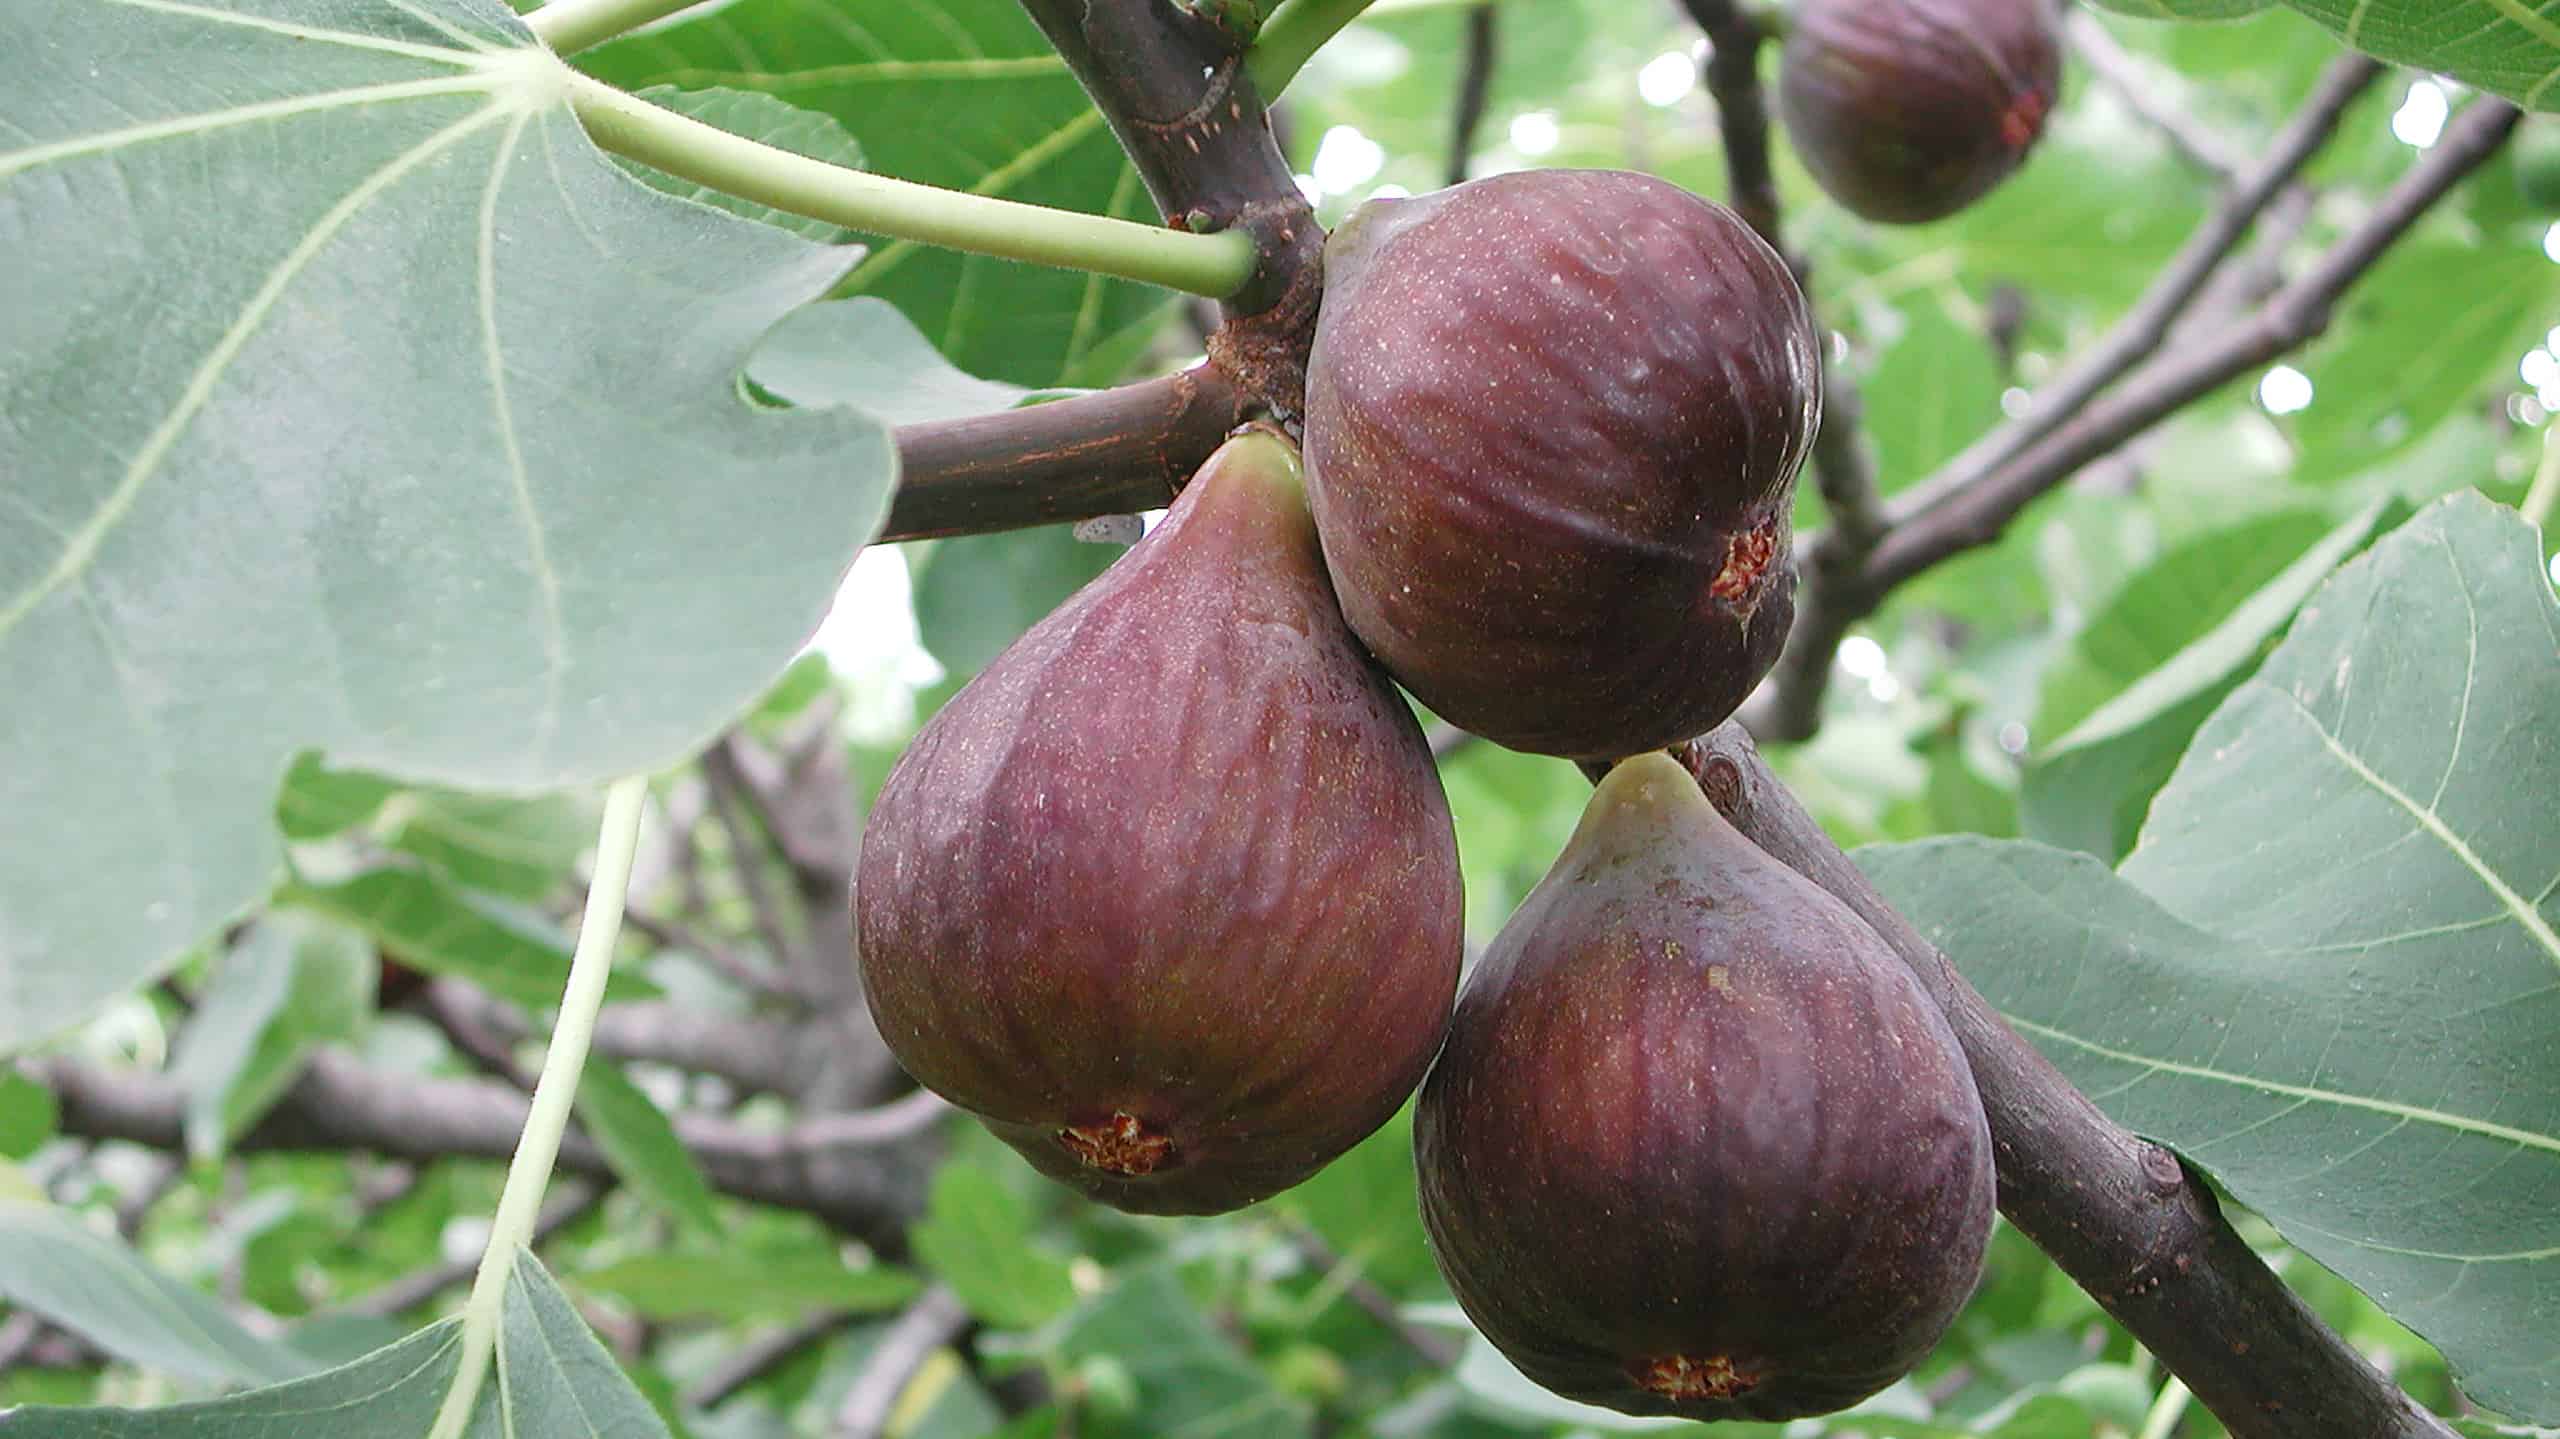 A closeup of the fruits of Ficus carica or the common fig tree.